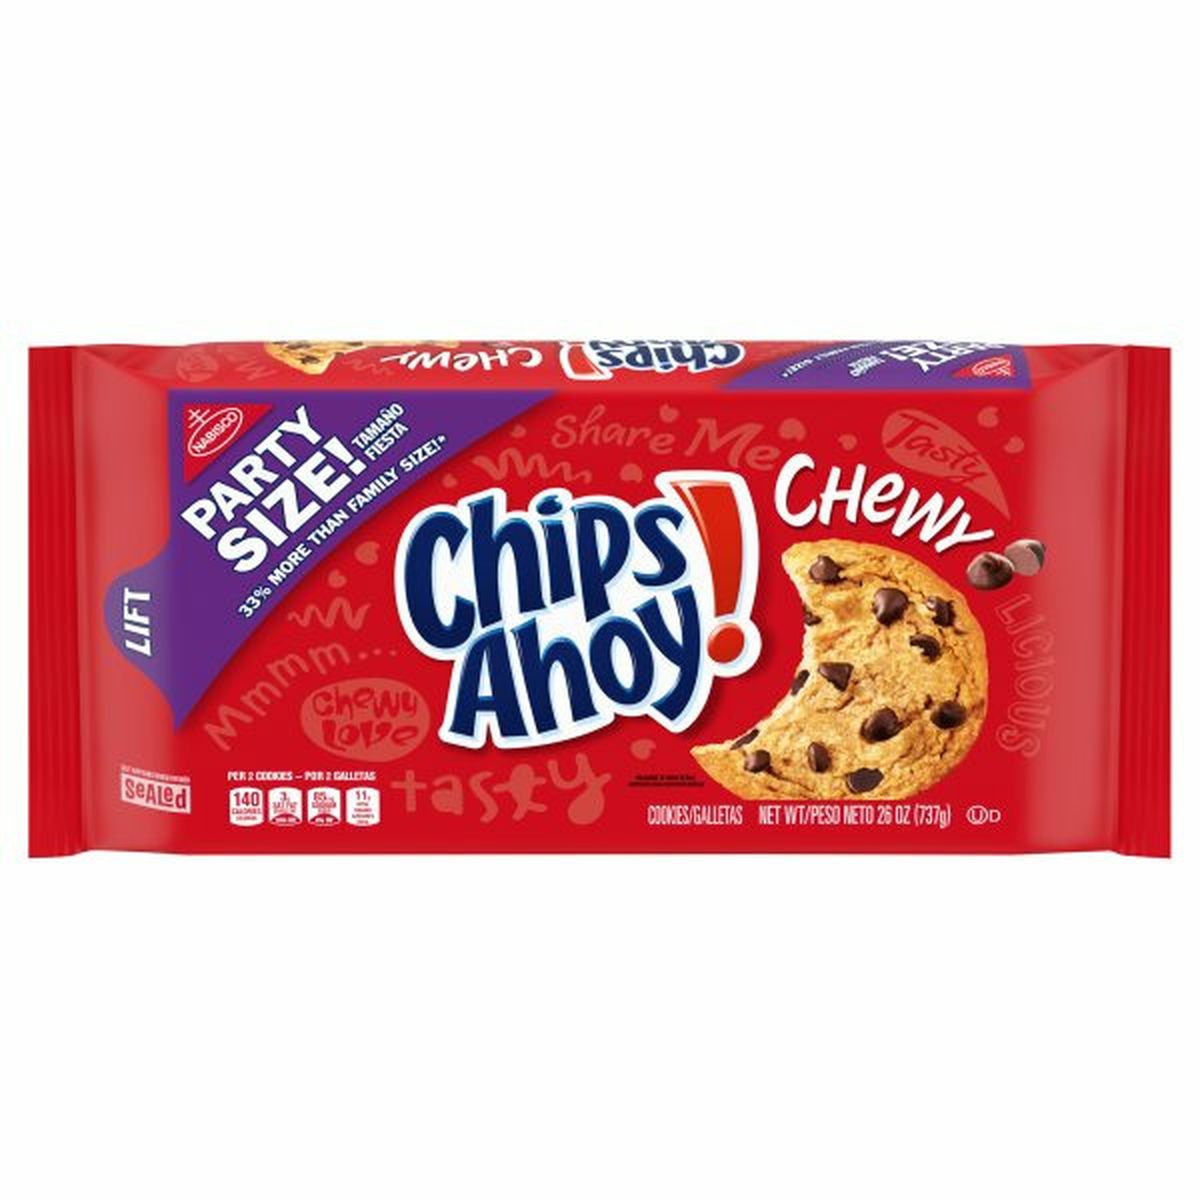 Calories in Chips Ahoy! Cookies, Chewy, Party Size